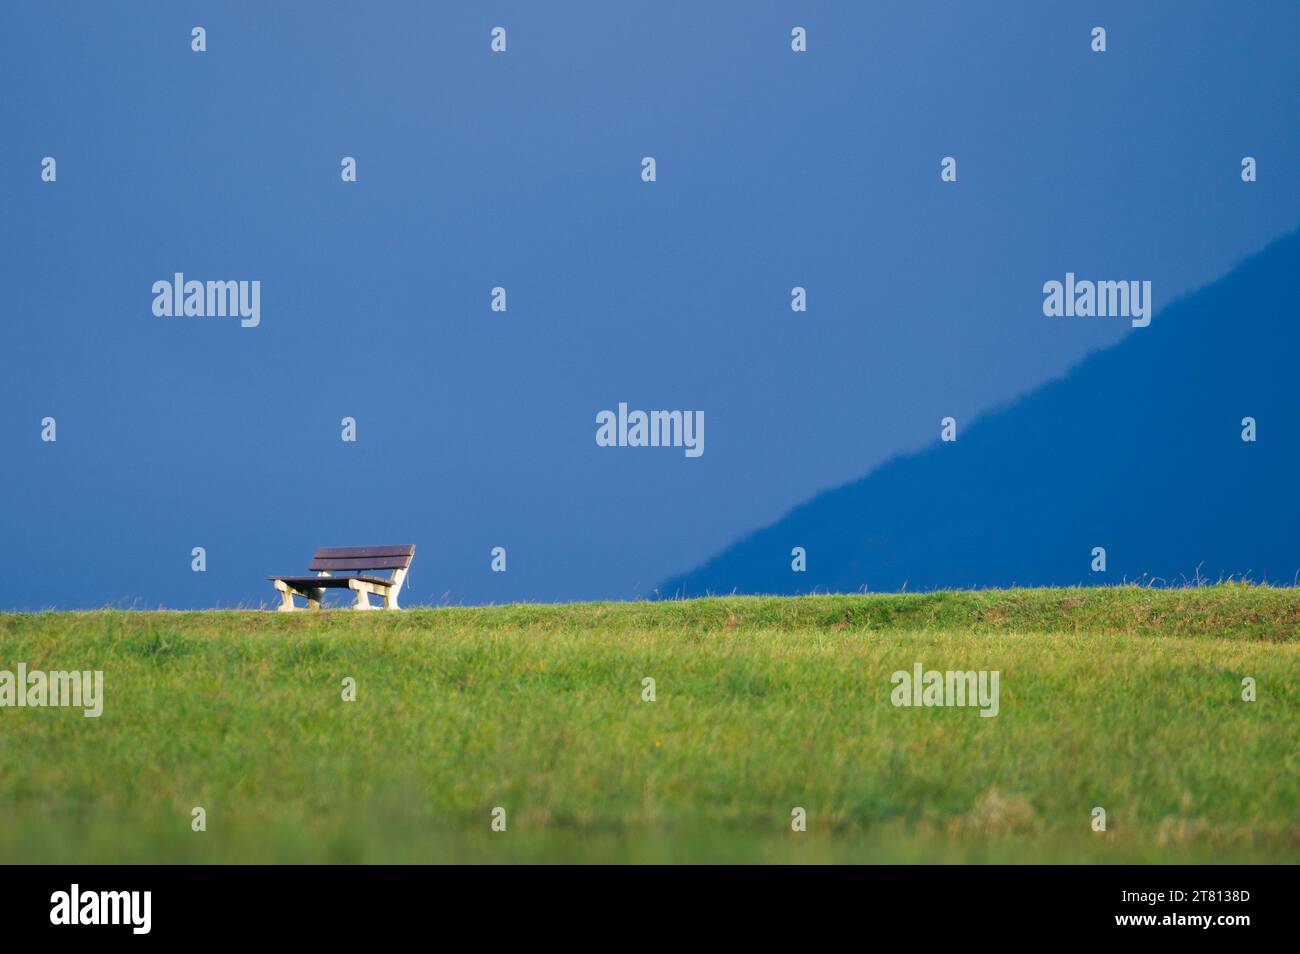 Lonely empty bench on the horizon in nature. Loneliness concept. Isolated on blue background. Negative space for placement of text. Stock Photo